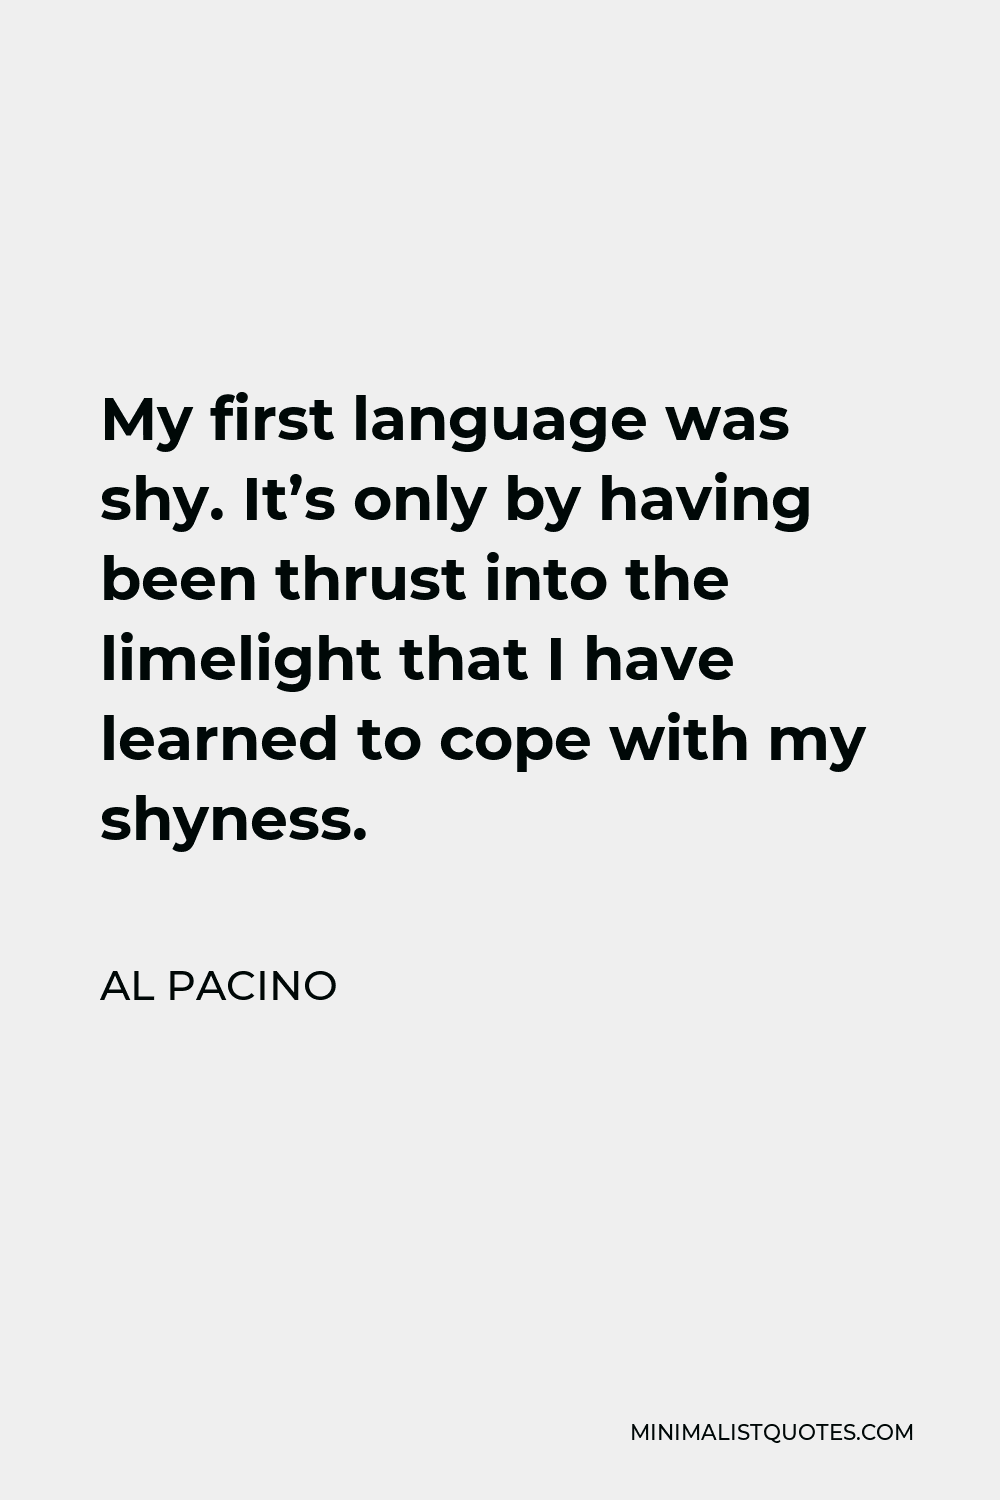 al-pacino-quote-my-first-language-was-shy-it-s-only-by-having-been